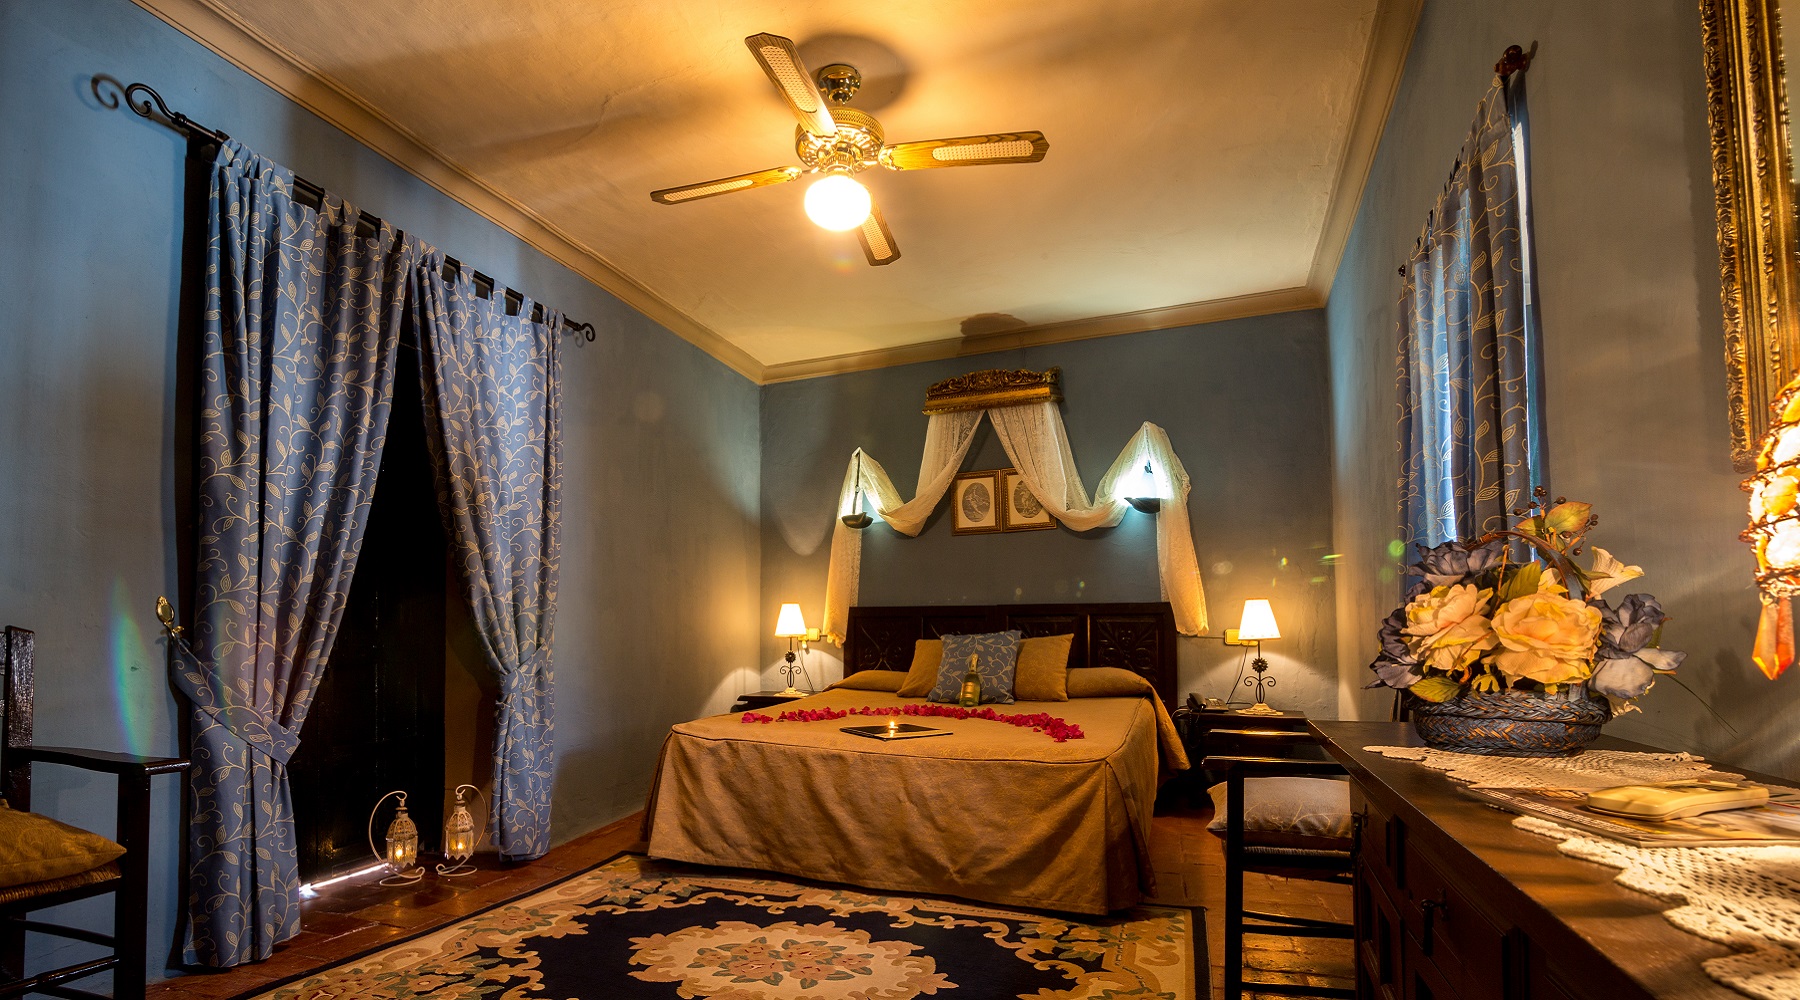 Unforgettable romance getaway with dinner - Suite